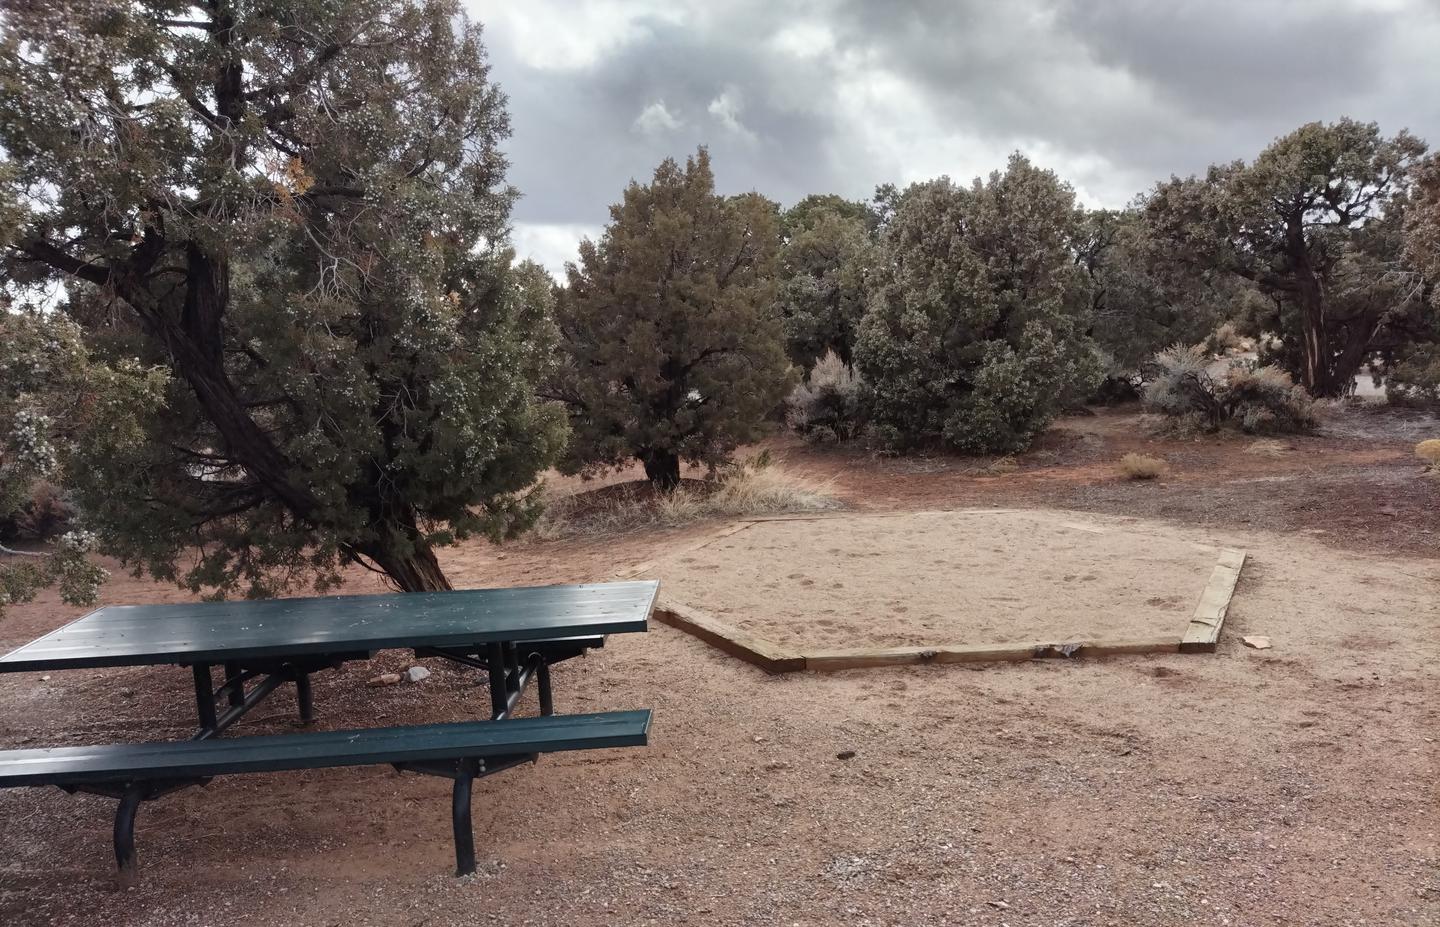 Metal picnic table and tent pad at Site 9, surrounded by forest. Site 9 has a tent pad, a picnic table and a metal fire ring. The site is surrounded by a pinon-juniper forest.